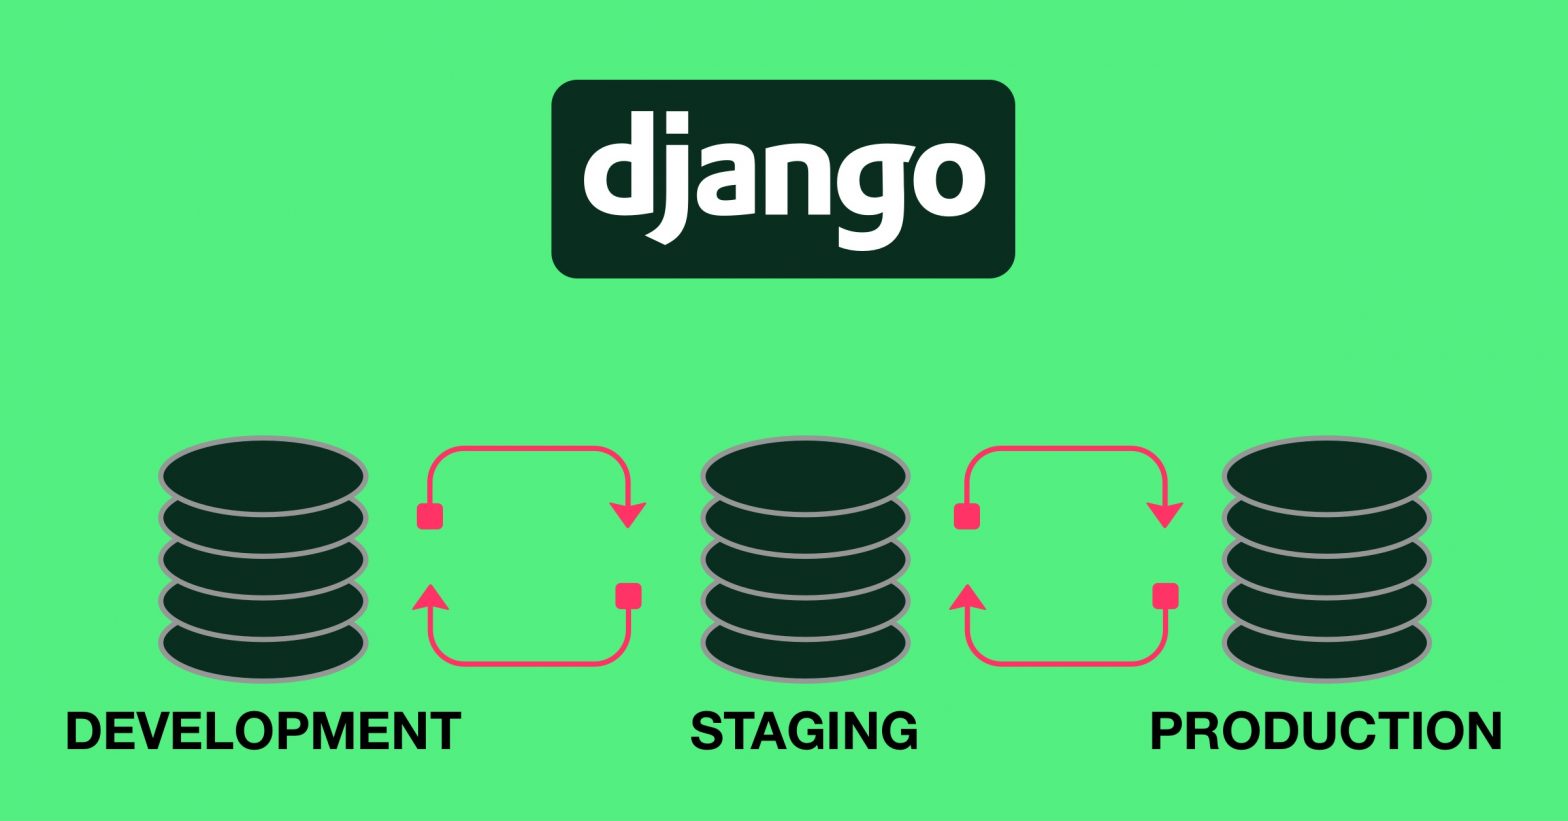 syncing django development, staging, and production environment databases